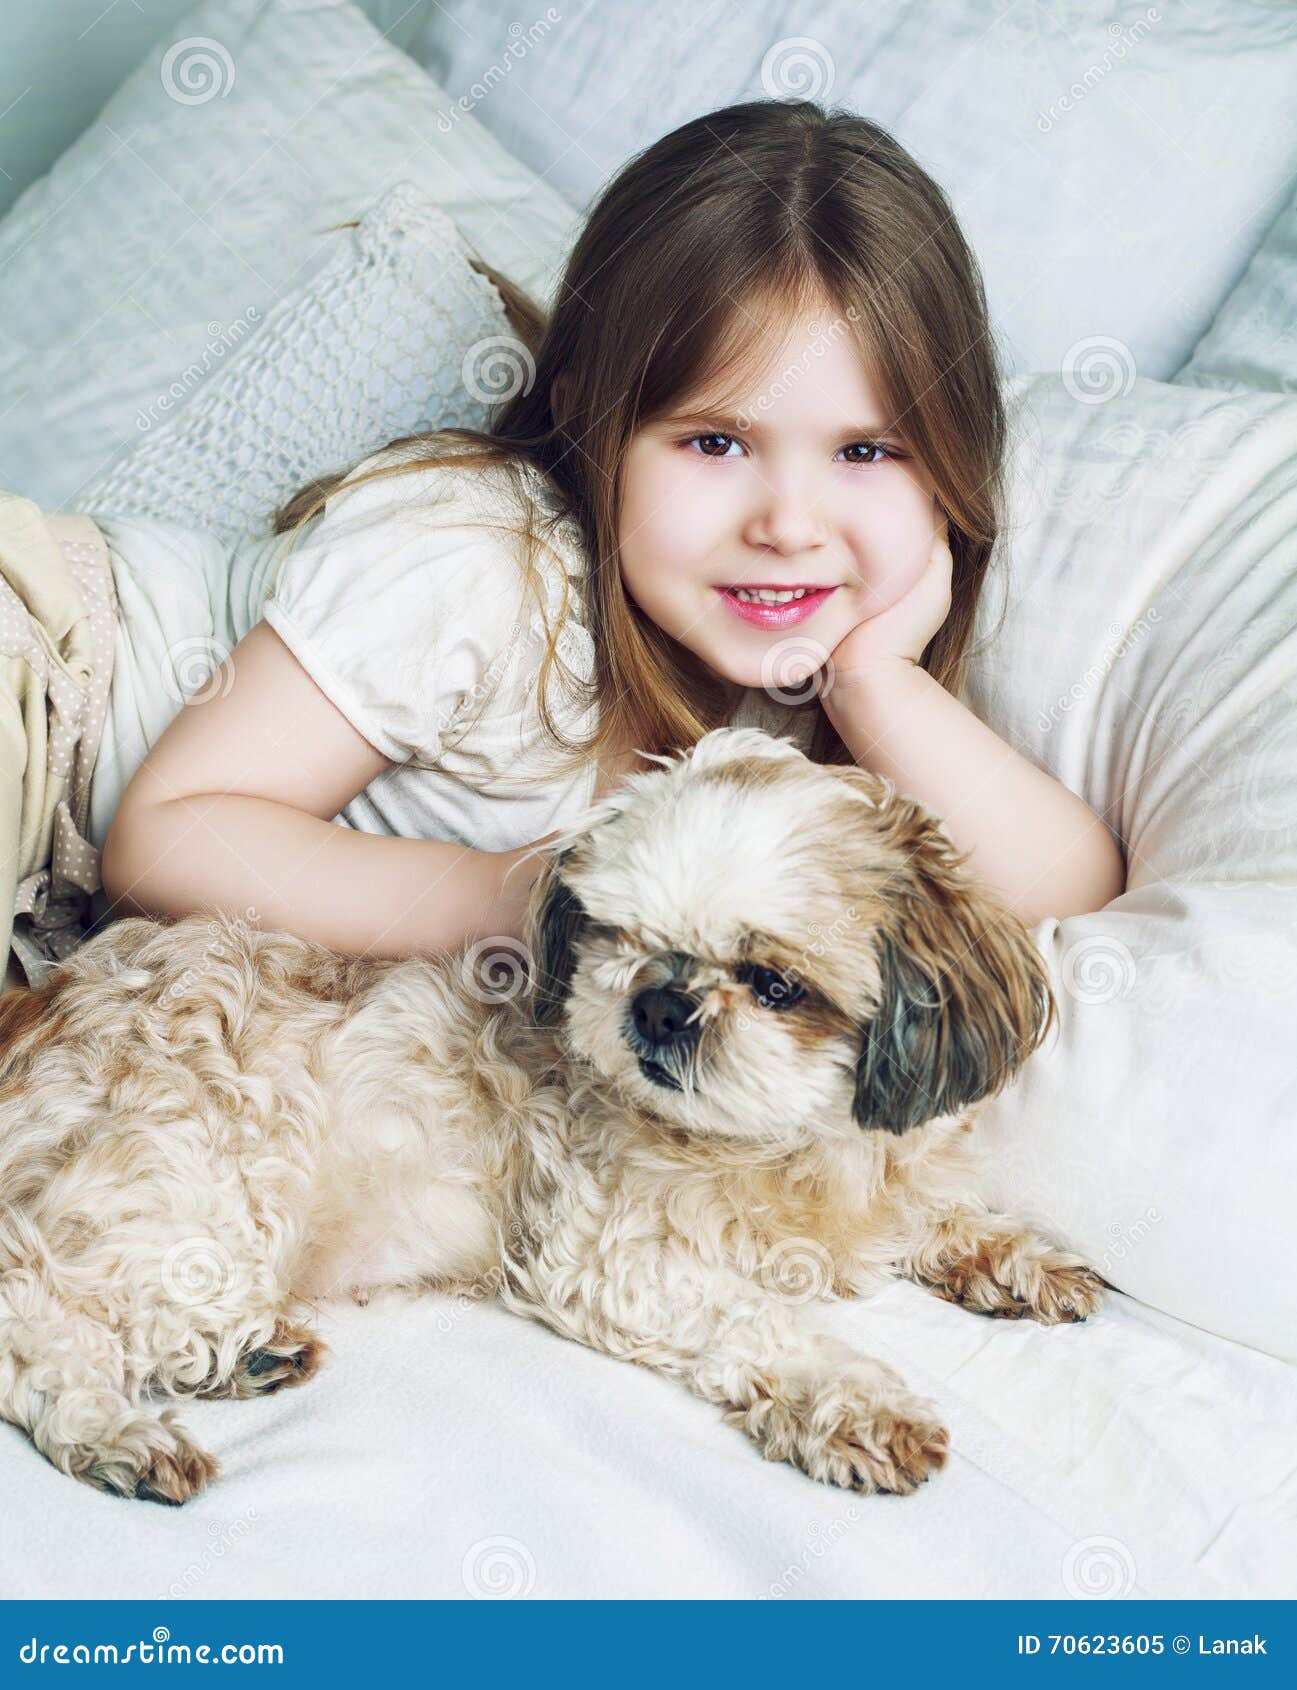 Girl with a dog stock image. Image of long, daughter - 70623605